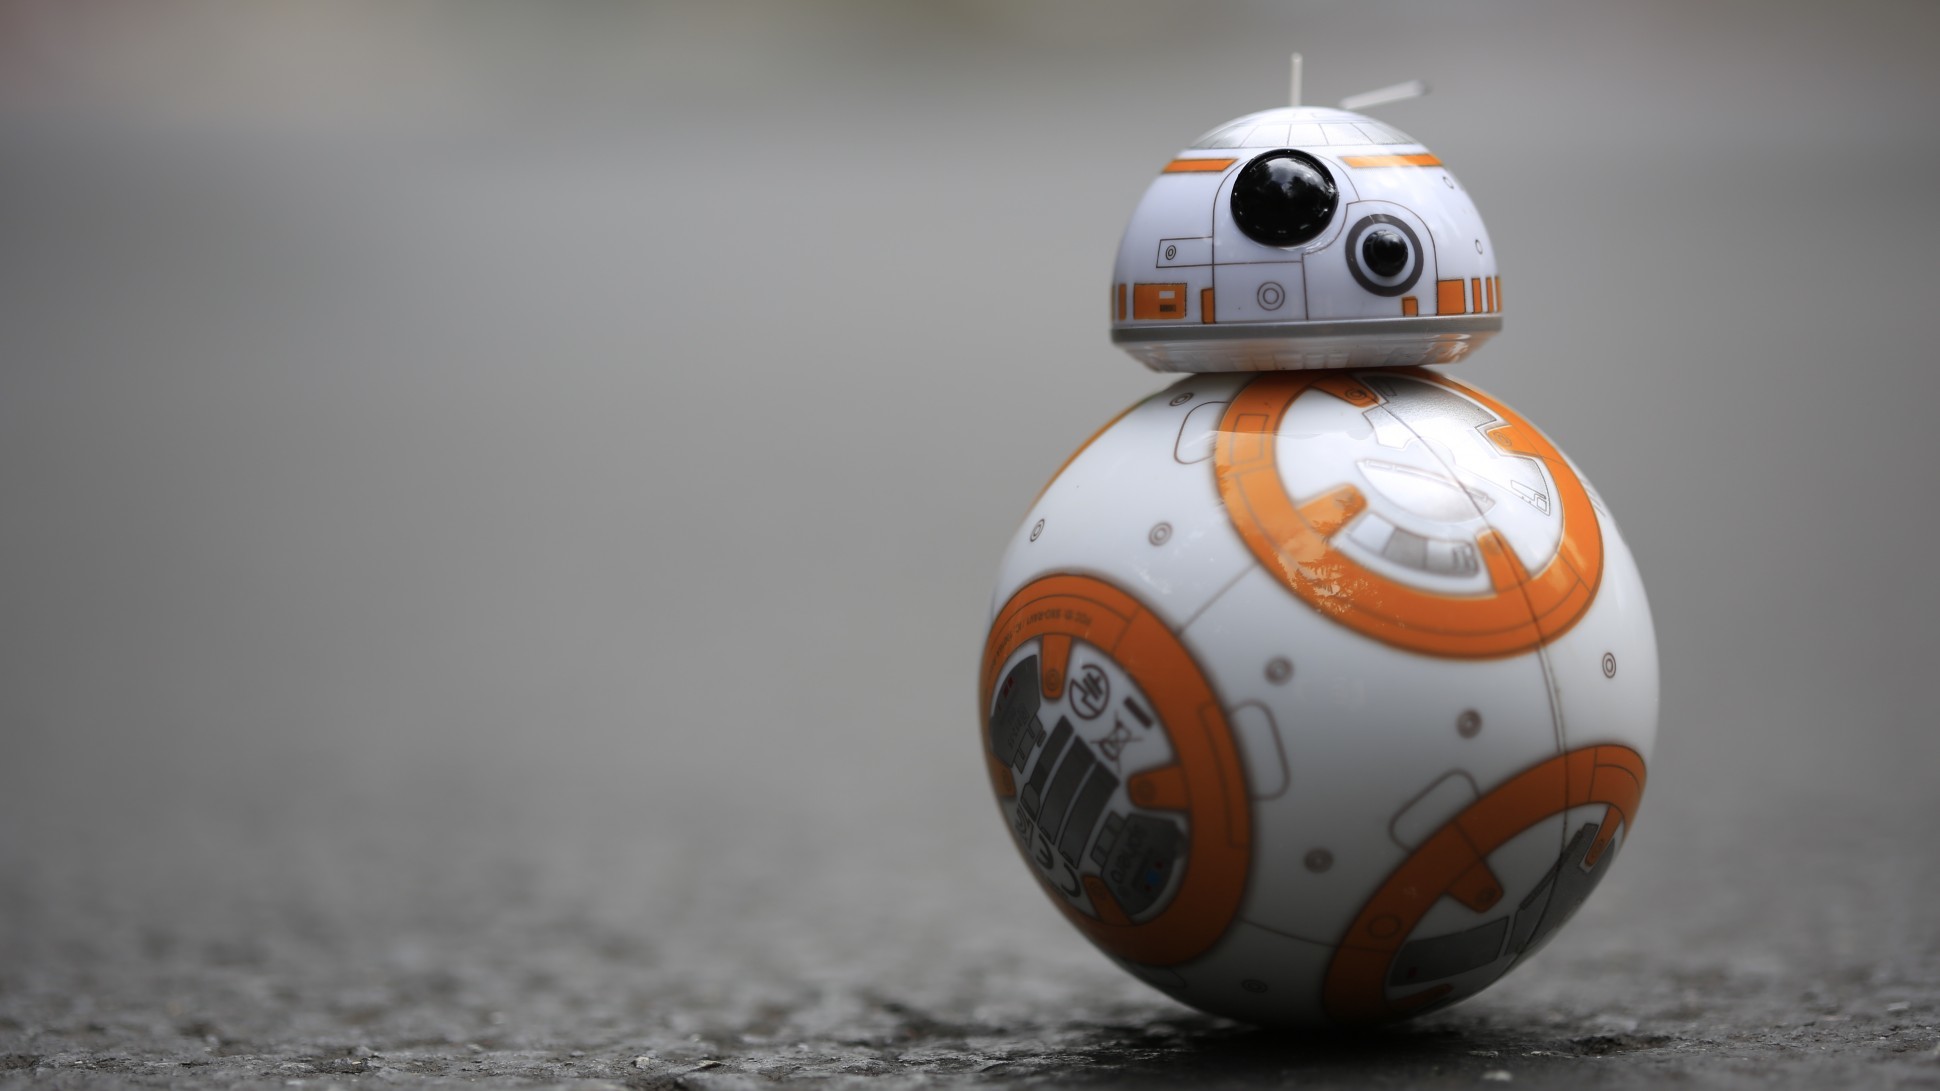 Star Wars BB 8 Droid Wallpapers – HD Wallpapers Backgrounds of Your